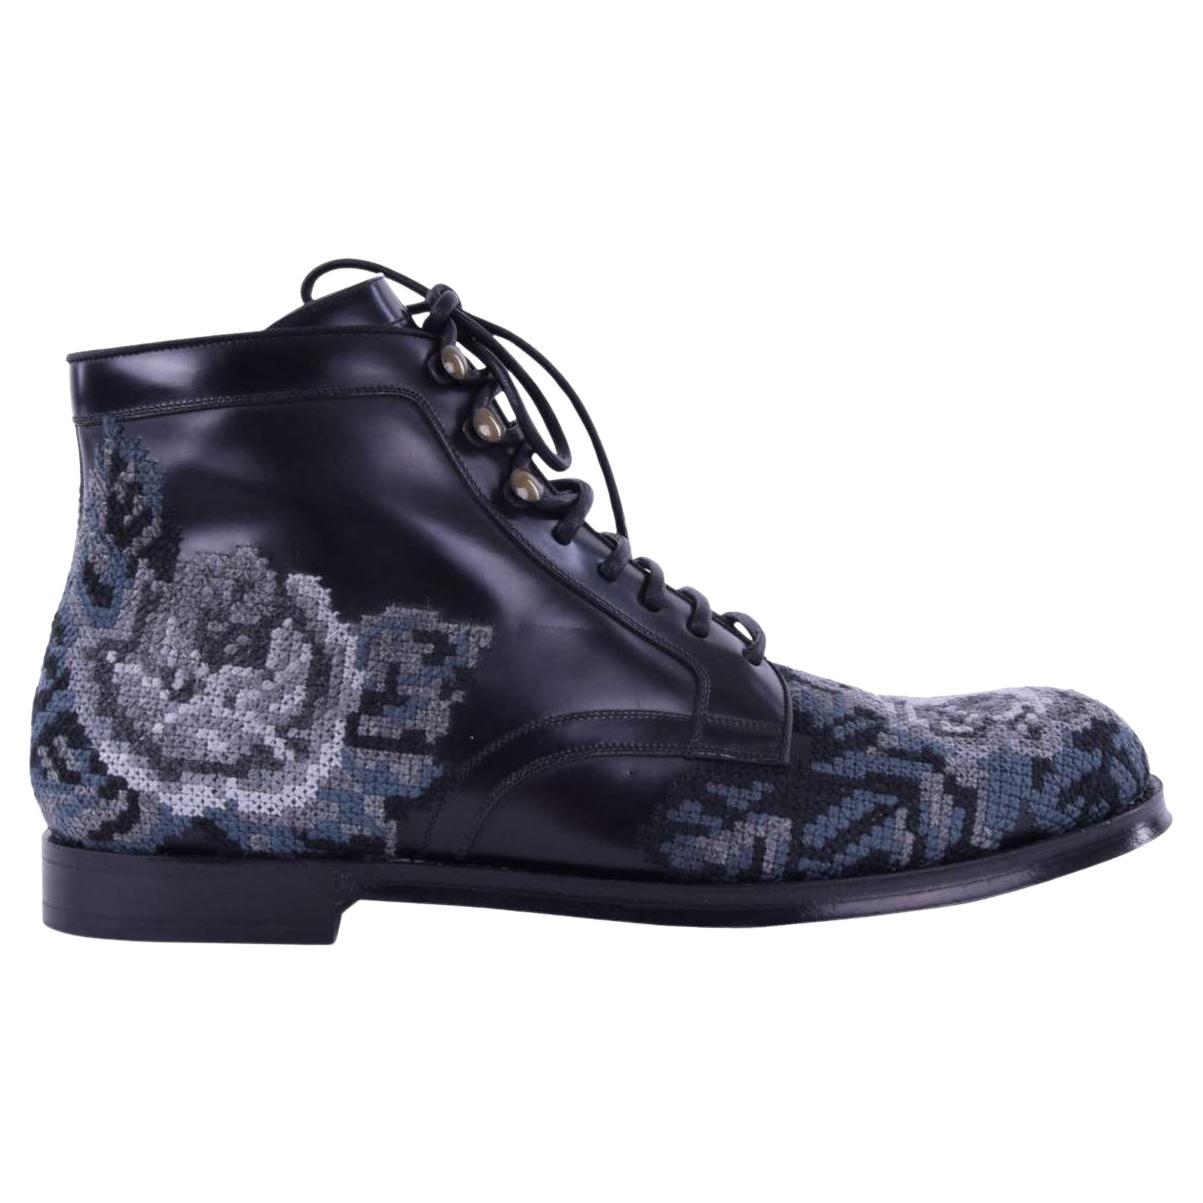 Dolce & Gabbana - RUNWAY Baroque Embroidery Boots Black EUR 42 For Sale